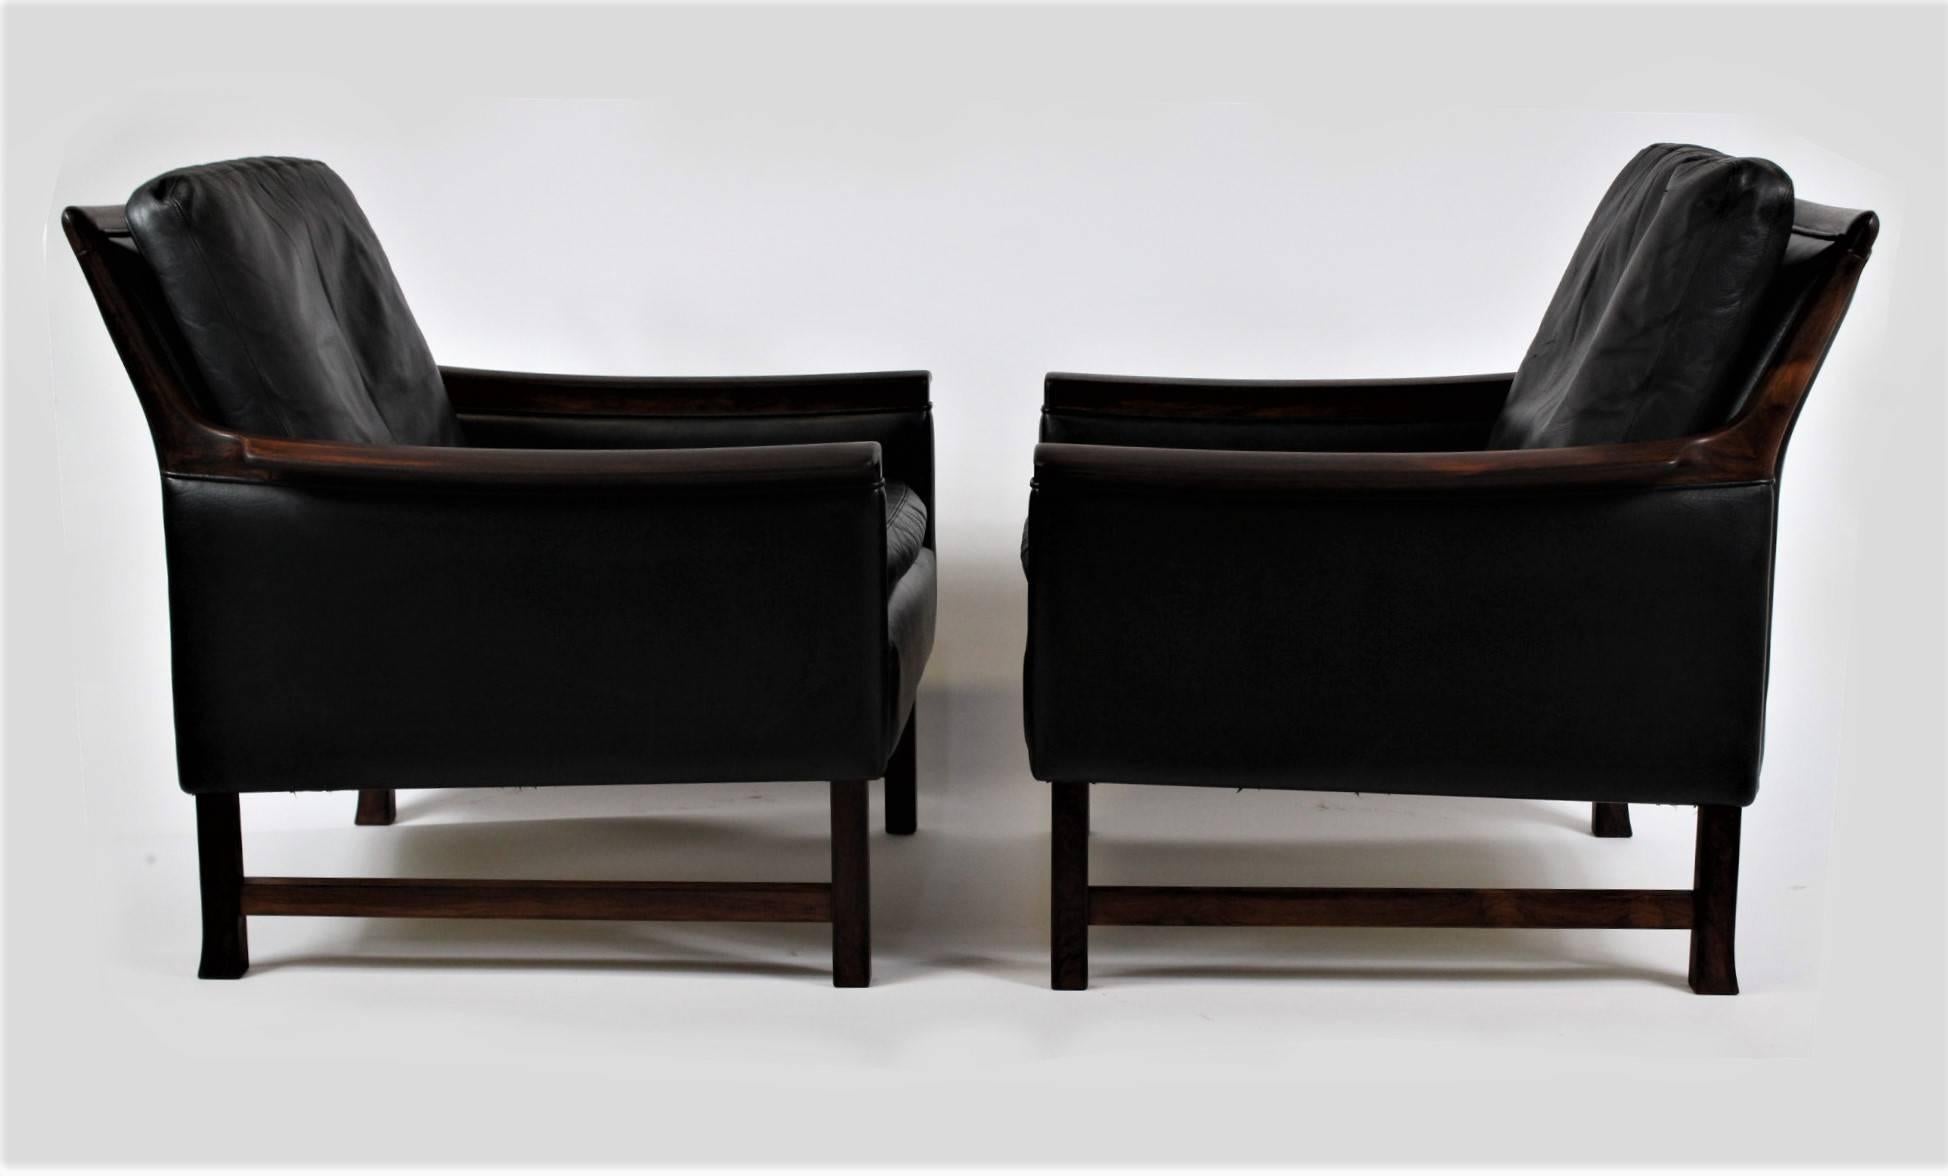 Pair of high quality black leather club chairs Minerva, designed by Norwegian designer Torbjørn Afdal for Bruksbo. Material is rosewood and perfectly worn leather. The chairs are in excellent vintage condition.